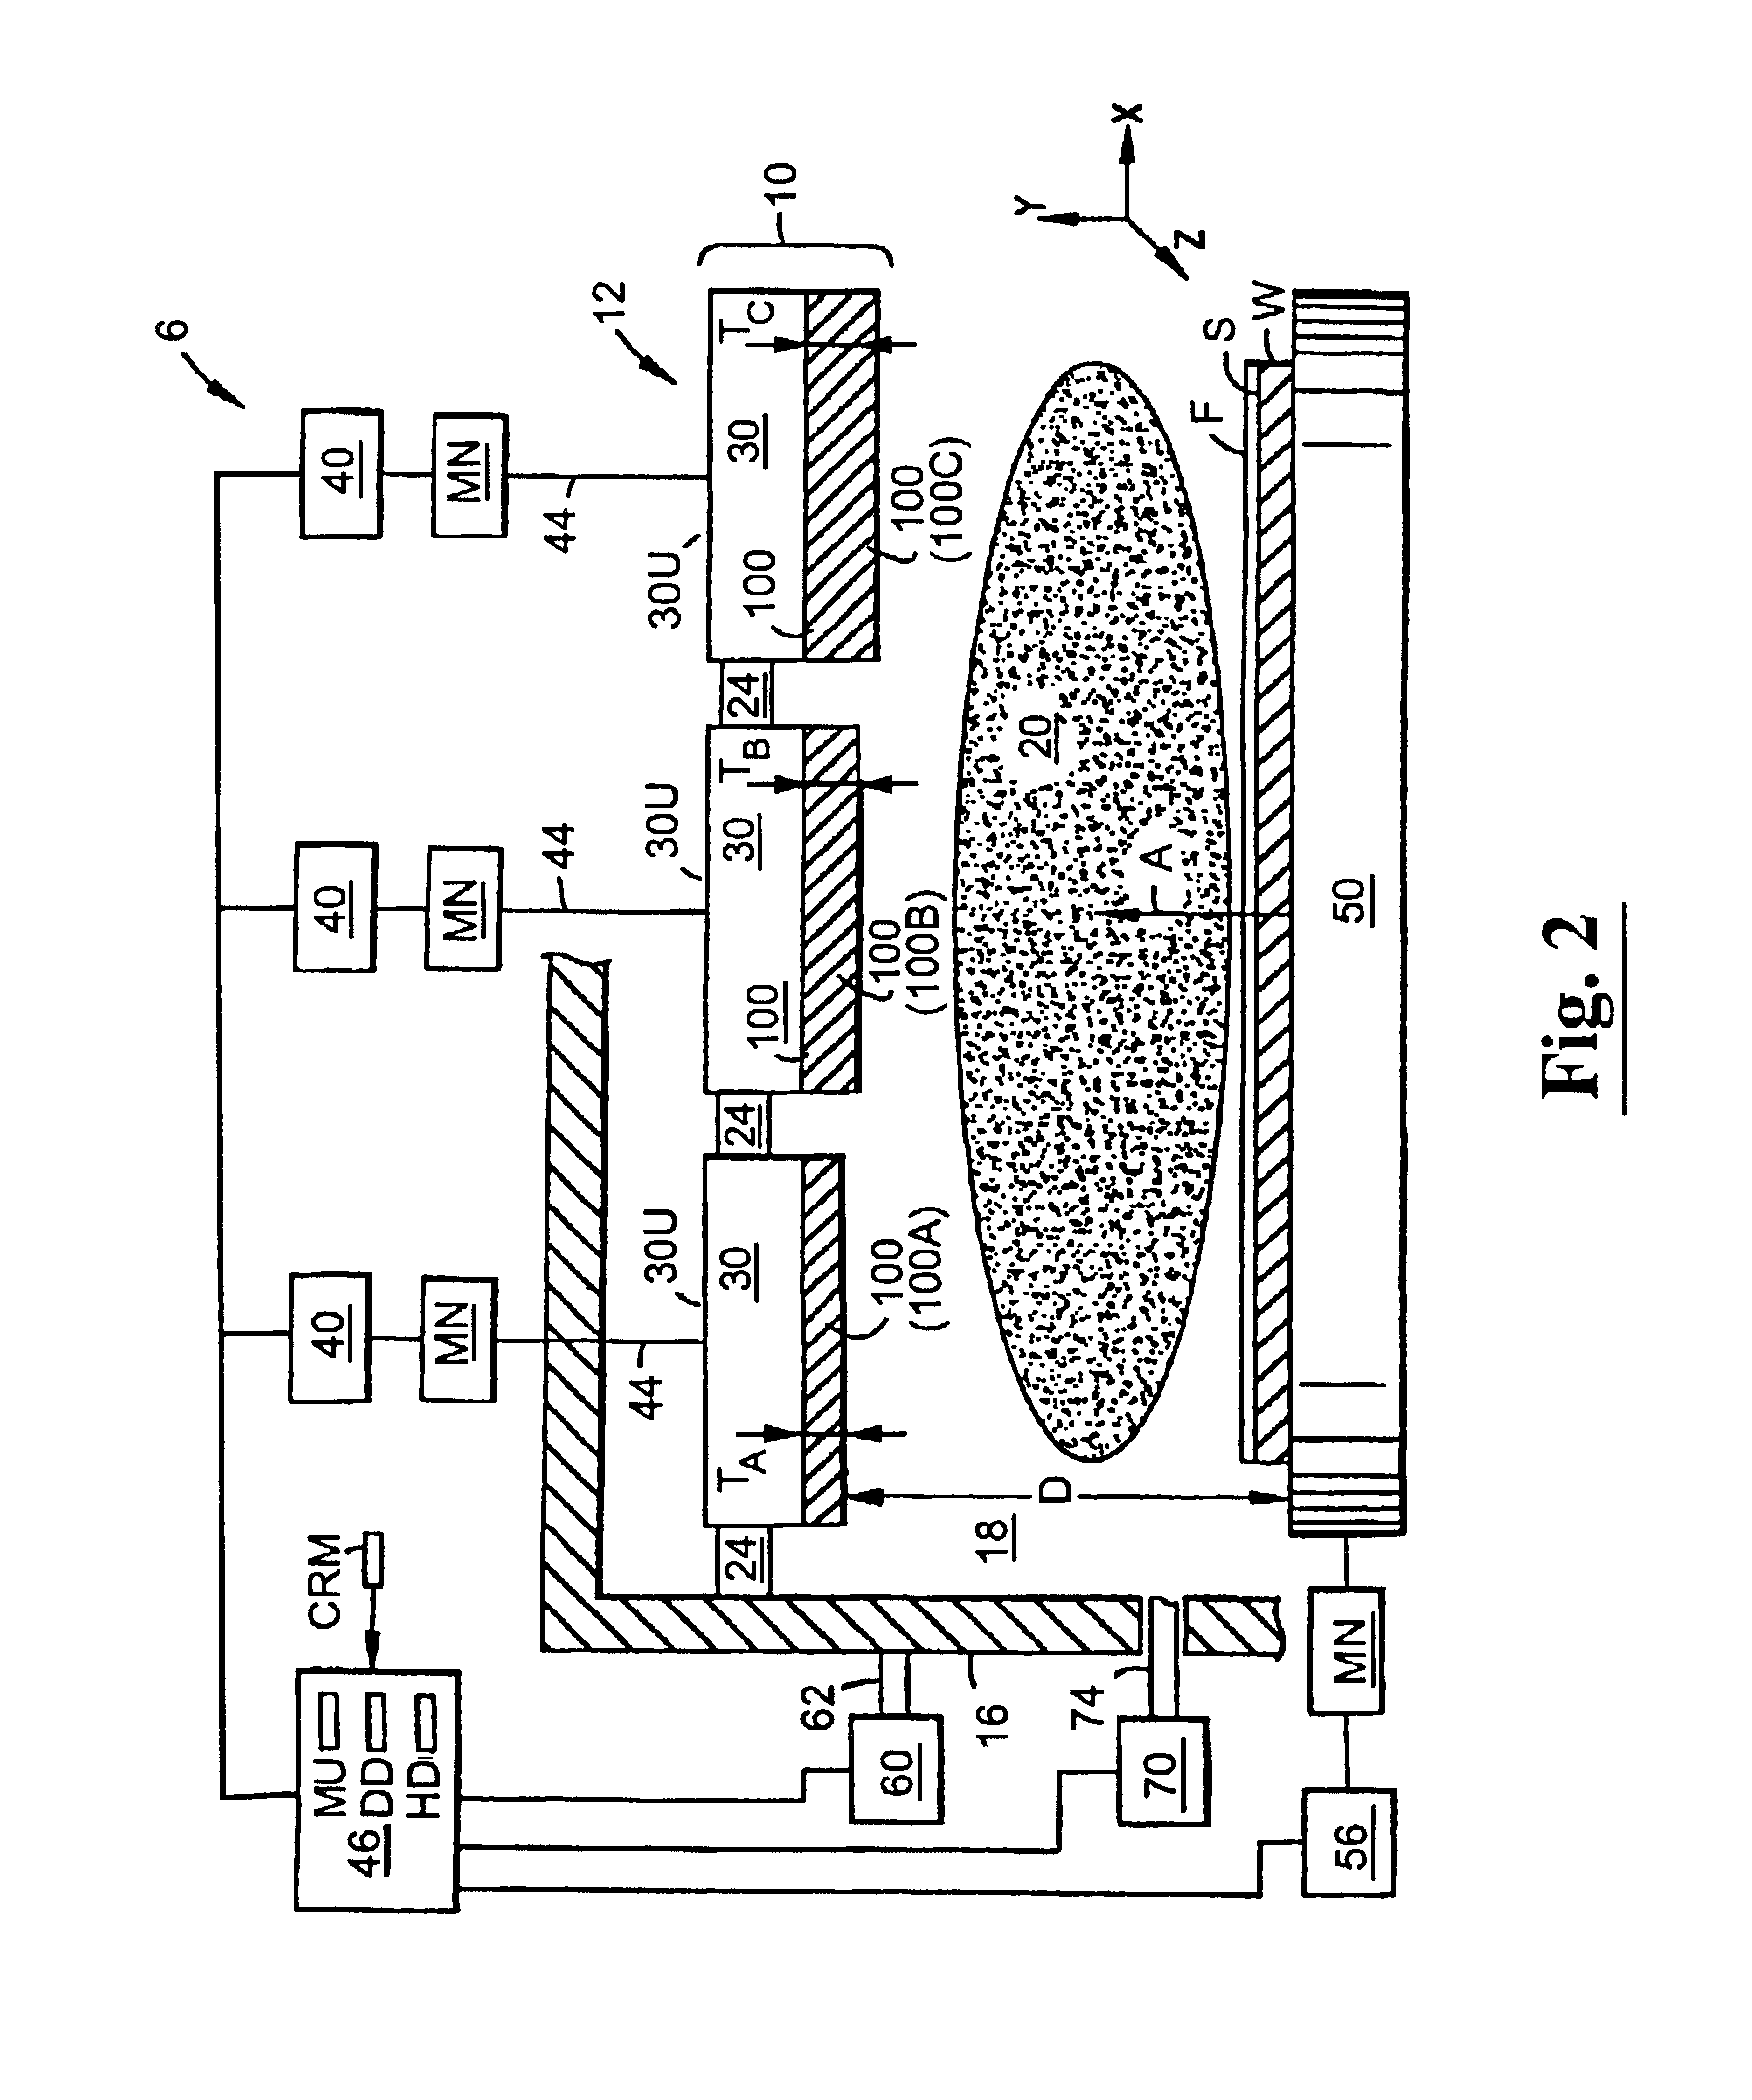 Method of adjusting the thickness of an electrode in a plasma processing system